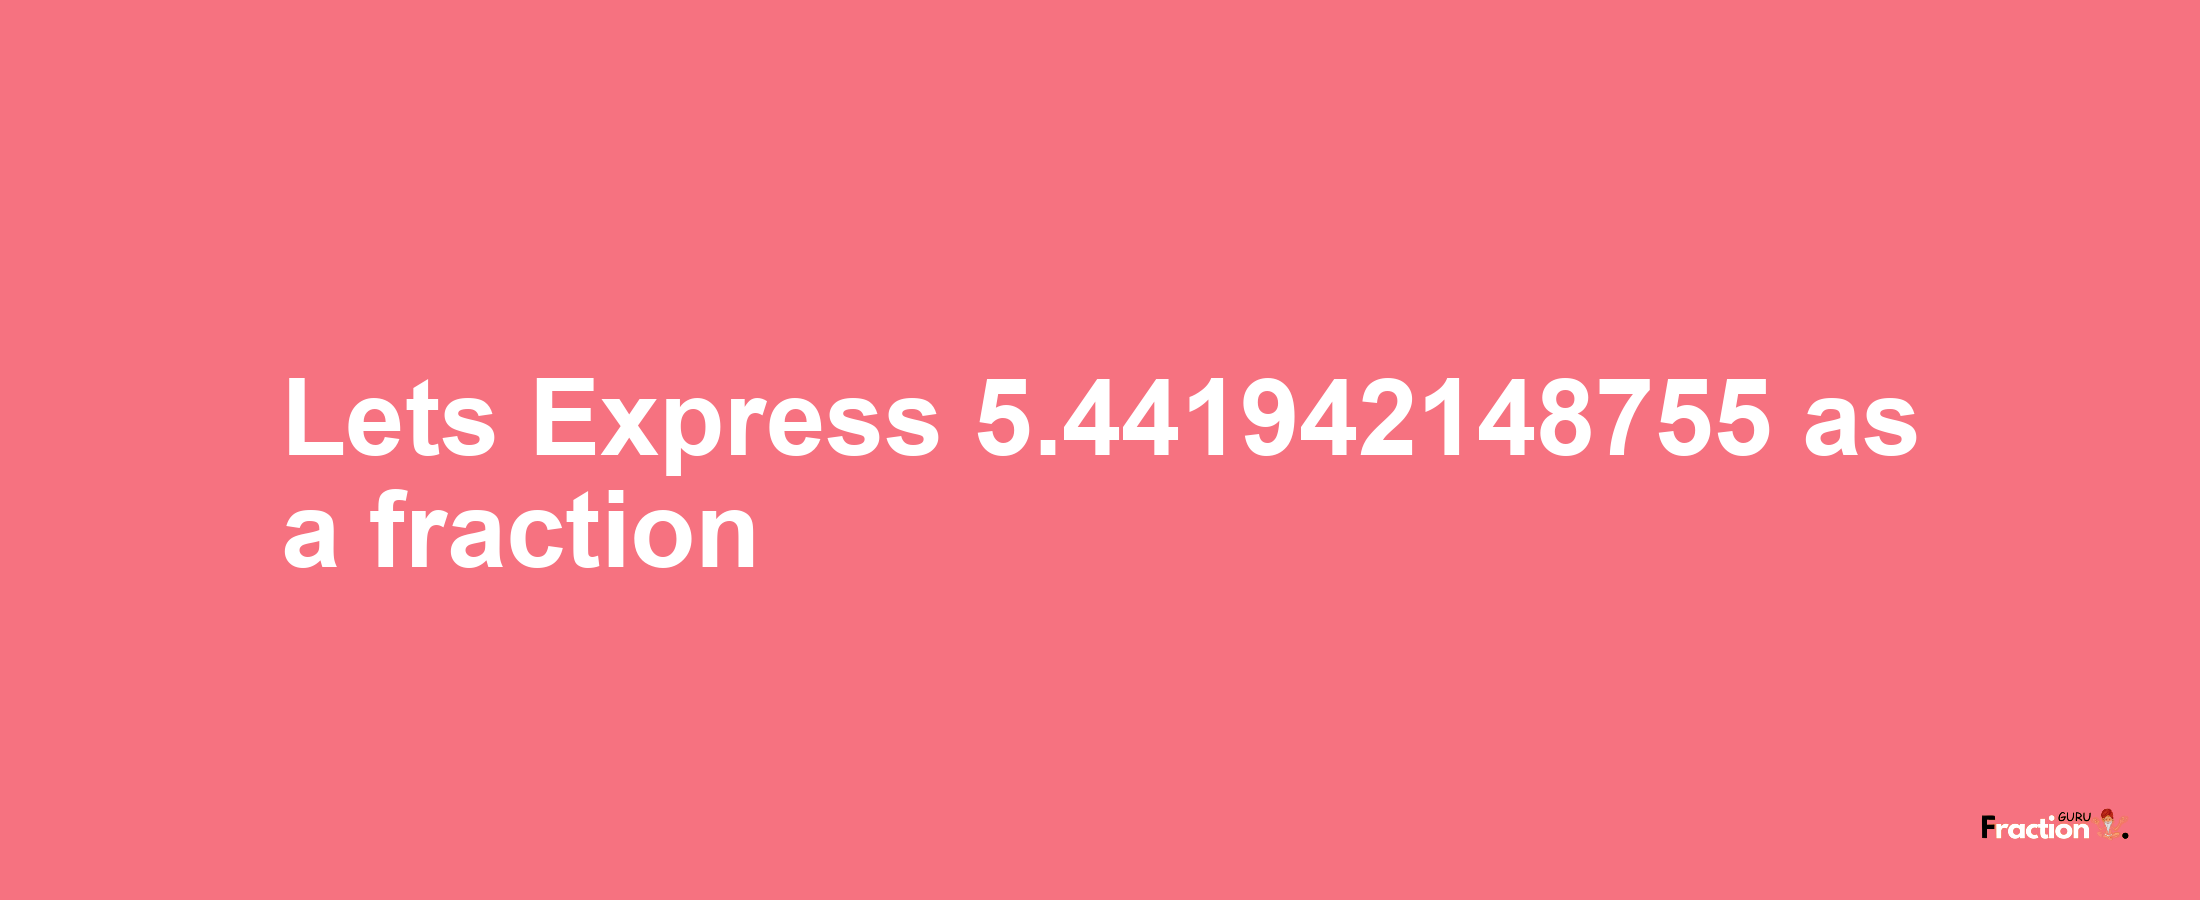 Lets Express 5.441942148755 as afraction